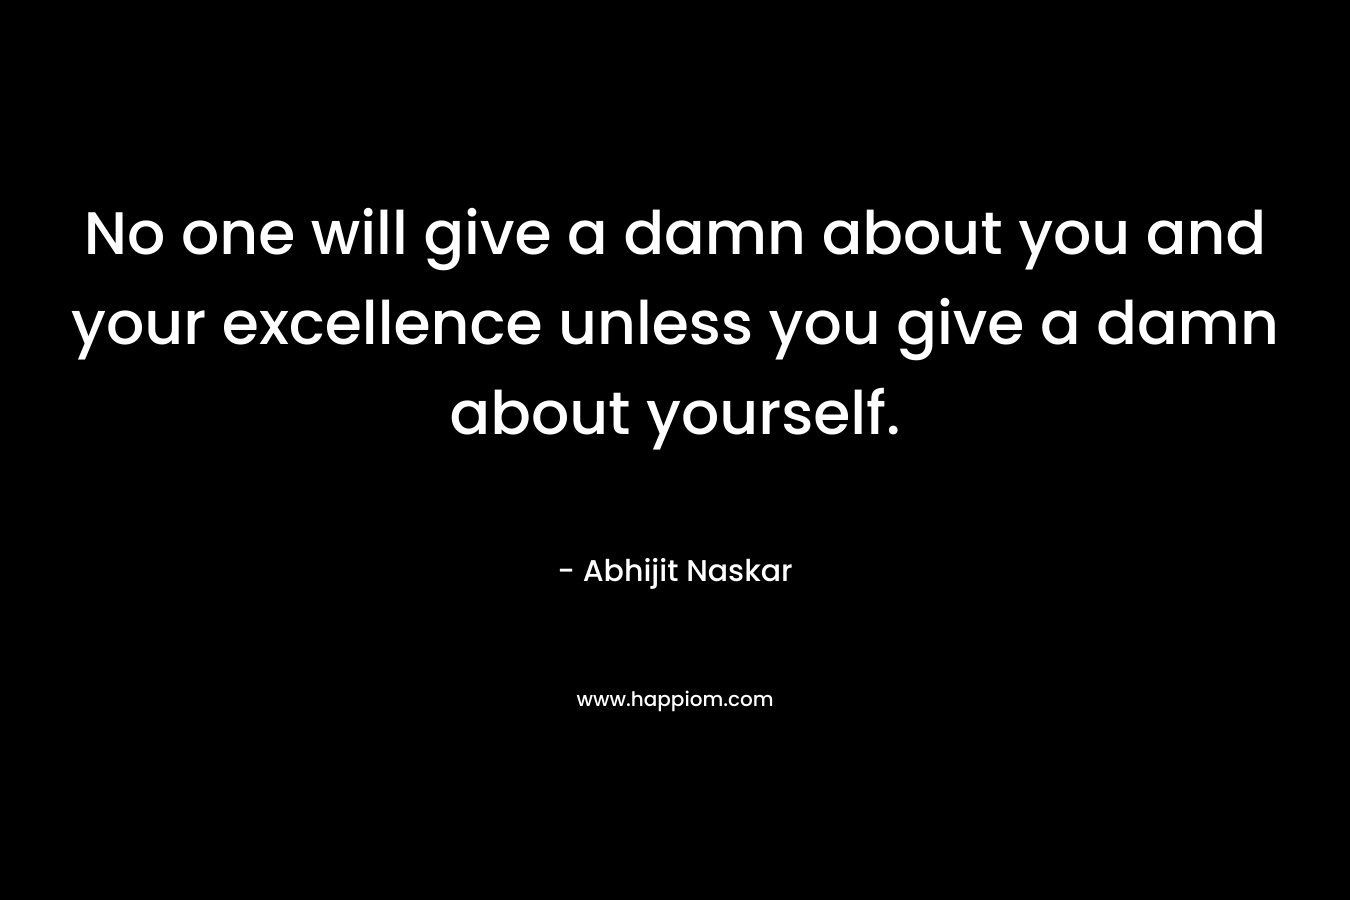 No one will give a damn about you and your excellence unless you give a damn about yourself.